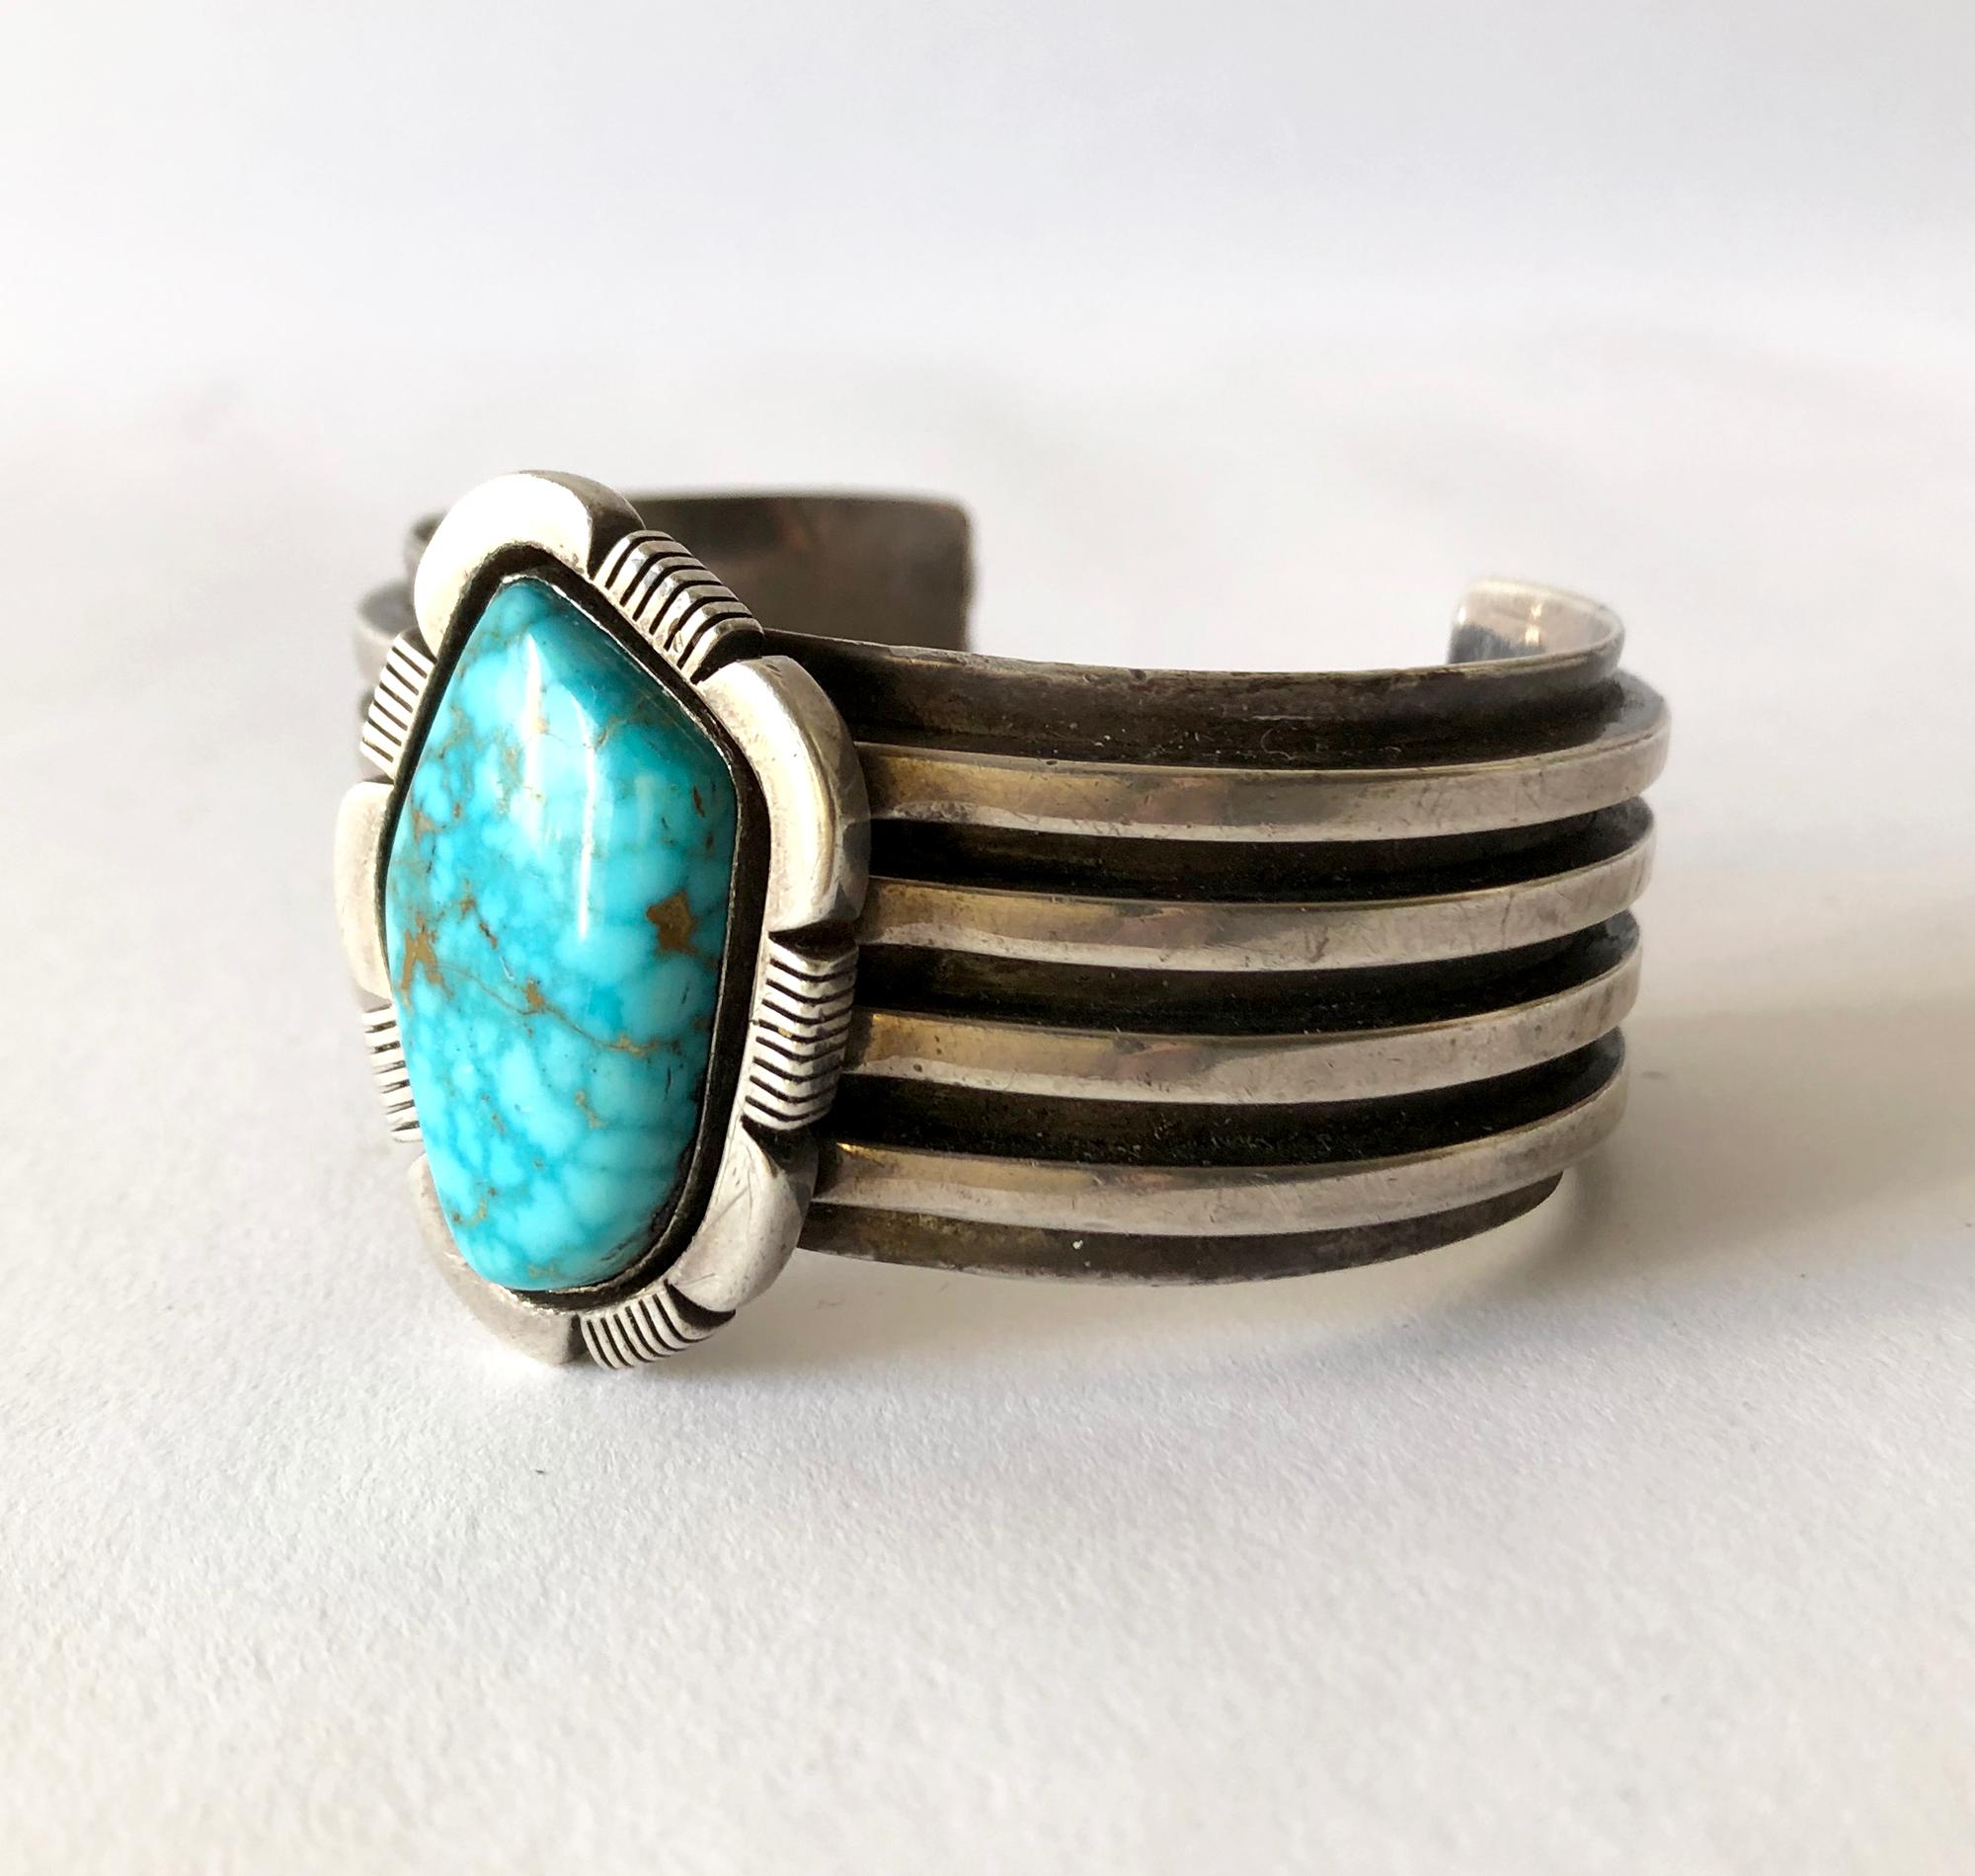 Heavy sterling silver and turquoise Navajo bracelet, circa 1970's.  Turquoise has natural fissures in the stone and should not be mistaken for cracks. The stone is smooth to the touch.  Bracelet has an inside circumference of 6.5